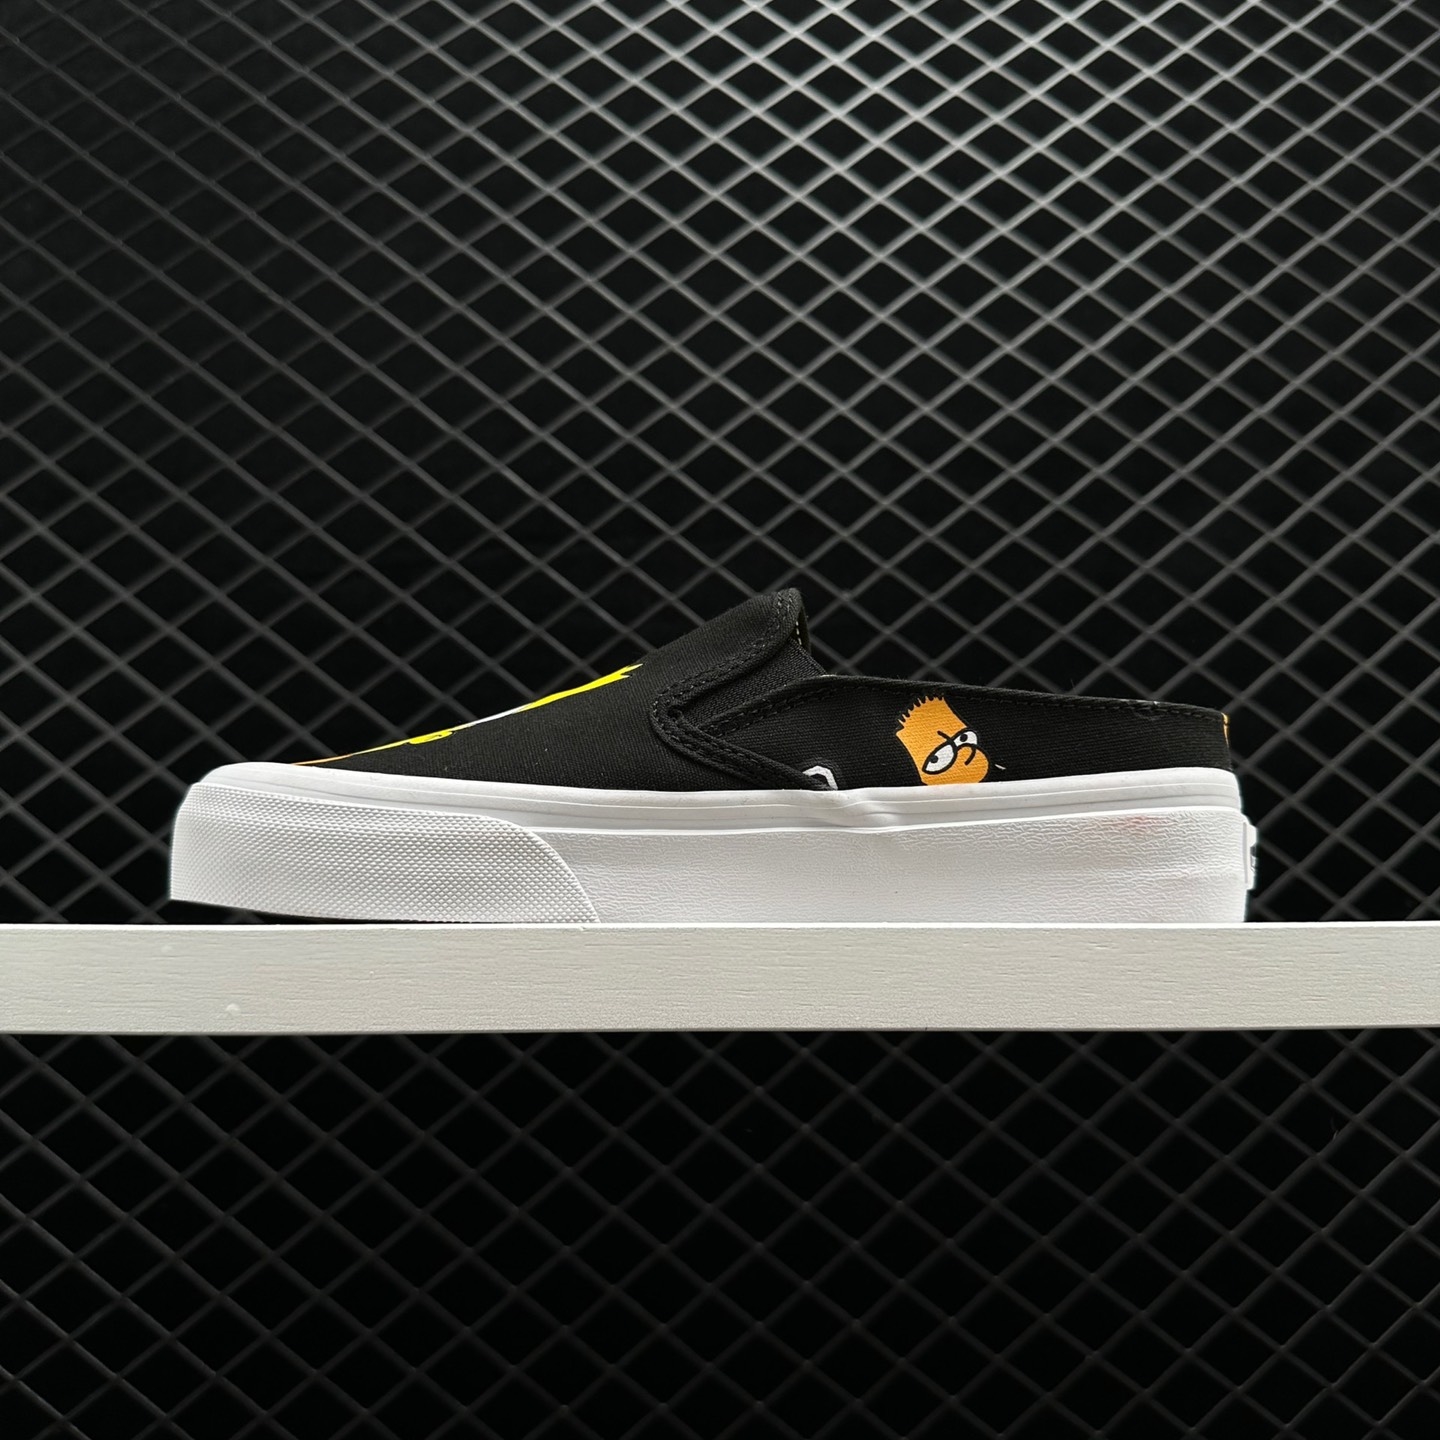 The Simpsons X Vans Slip-On Canvas Shoes in Black - Limited Edition